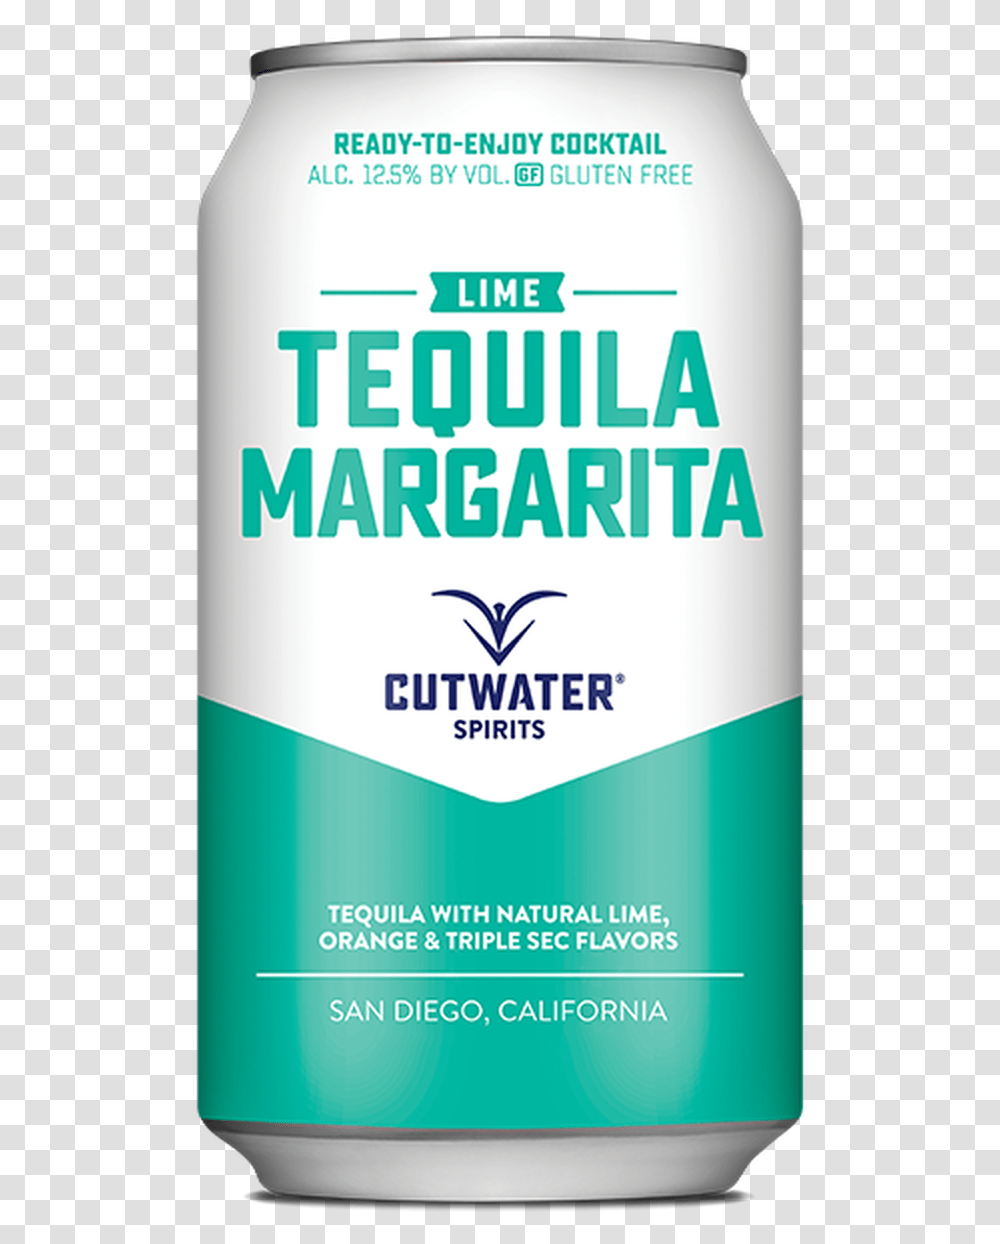 Cutwater Lime Tequila Margarita Cutwater Gin And Tonic, Tin, Can, Aluminium, Spray Can Transparent Png